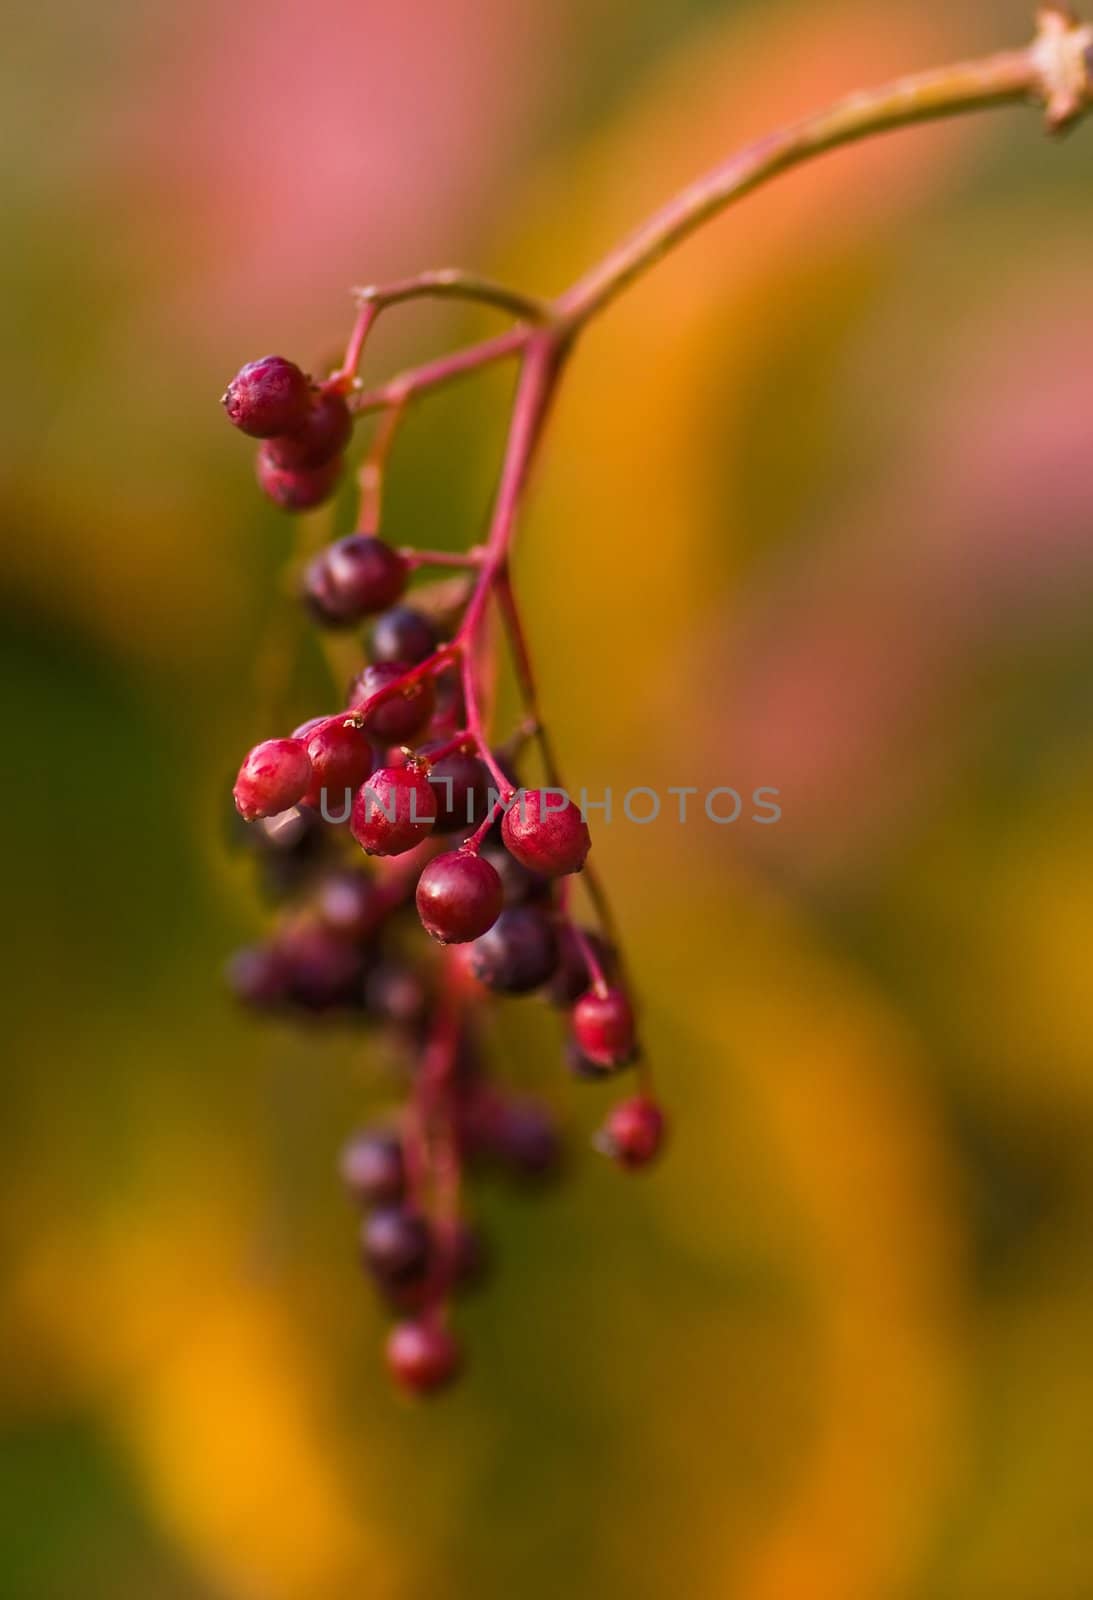 Elder berries with the colors of autumn leaves in the background